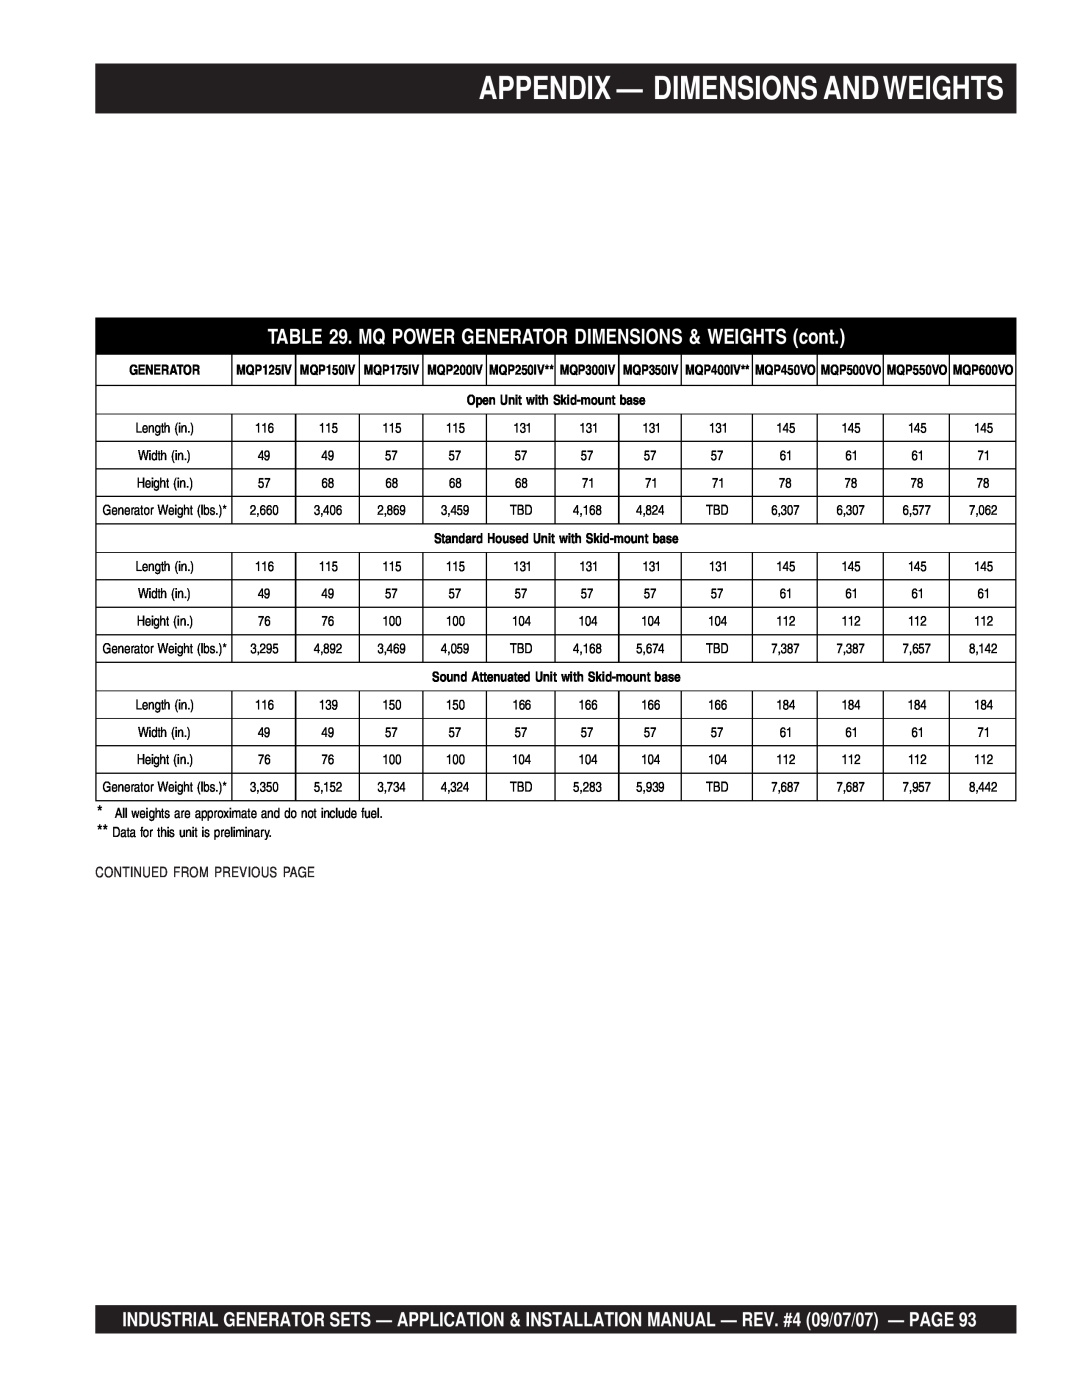 Multiquip MQP30GM, MQP20IZ, MQP40IZ, MQP45GM Appendix — Dimensions Andweights, Continued From Previous Page, Generator 